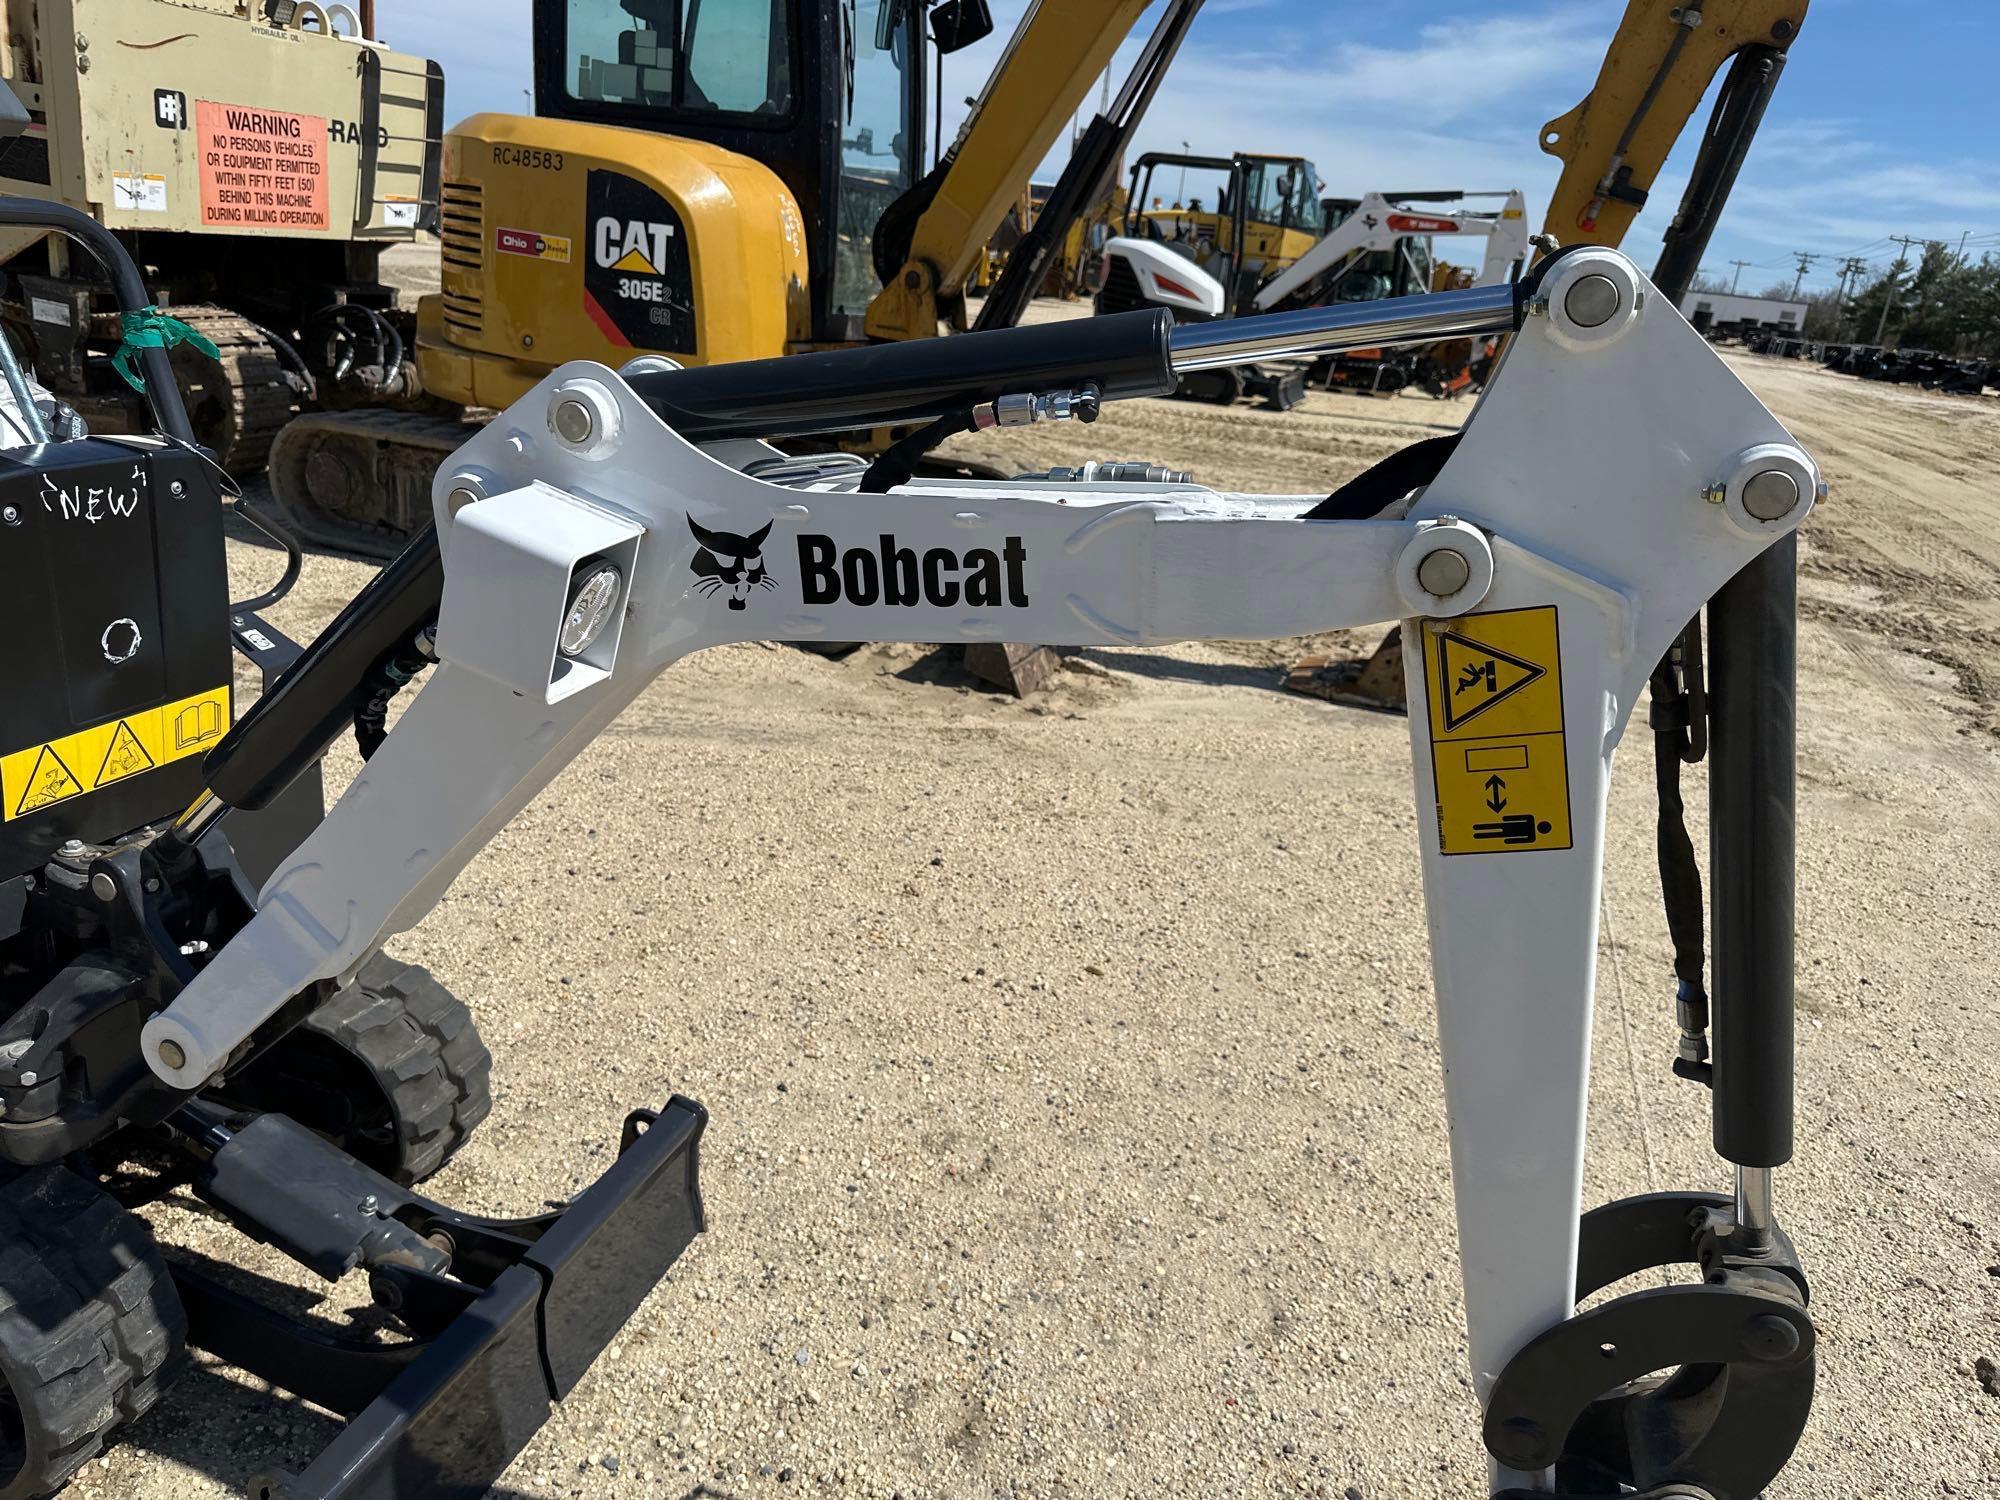 2023 BOBCAT E10 HYDRAULIC EXCAVATOR SN-14462...powered by diesel engine, equipped with OROPS, front